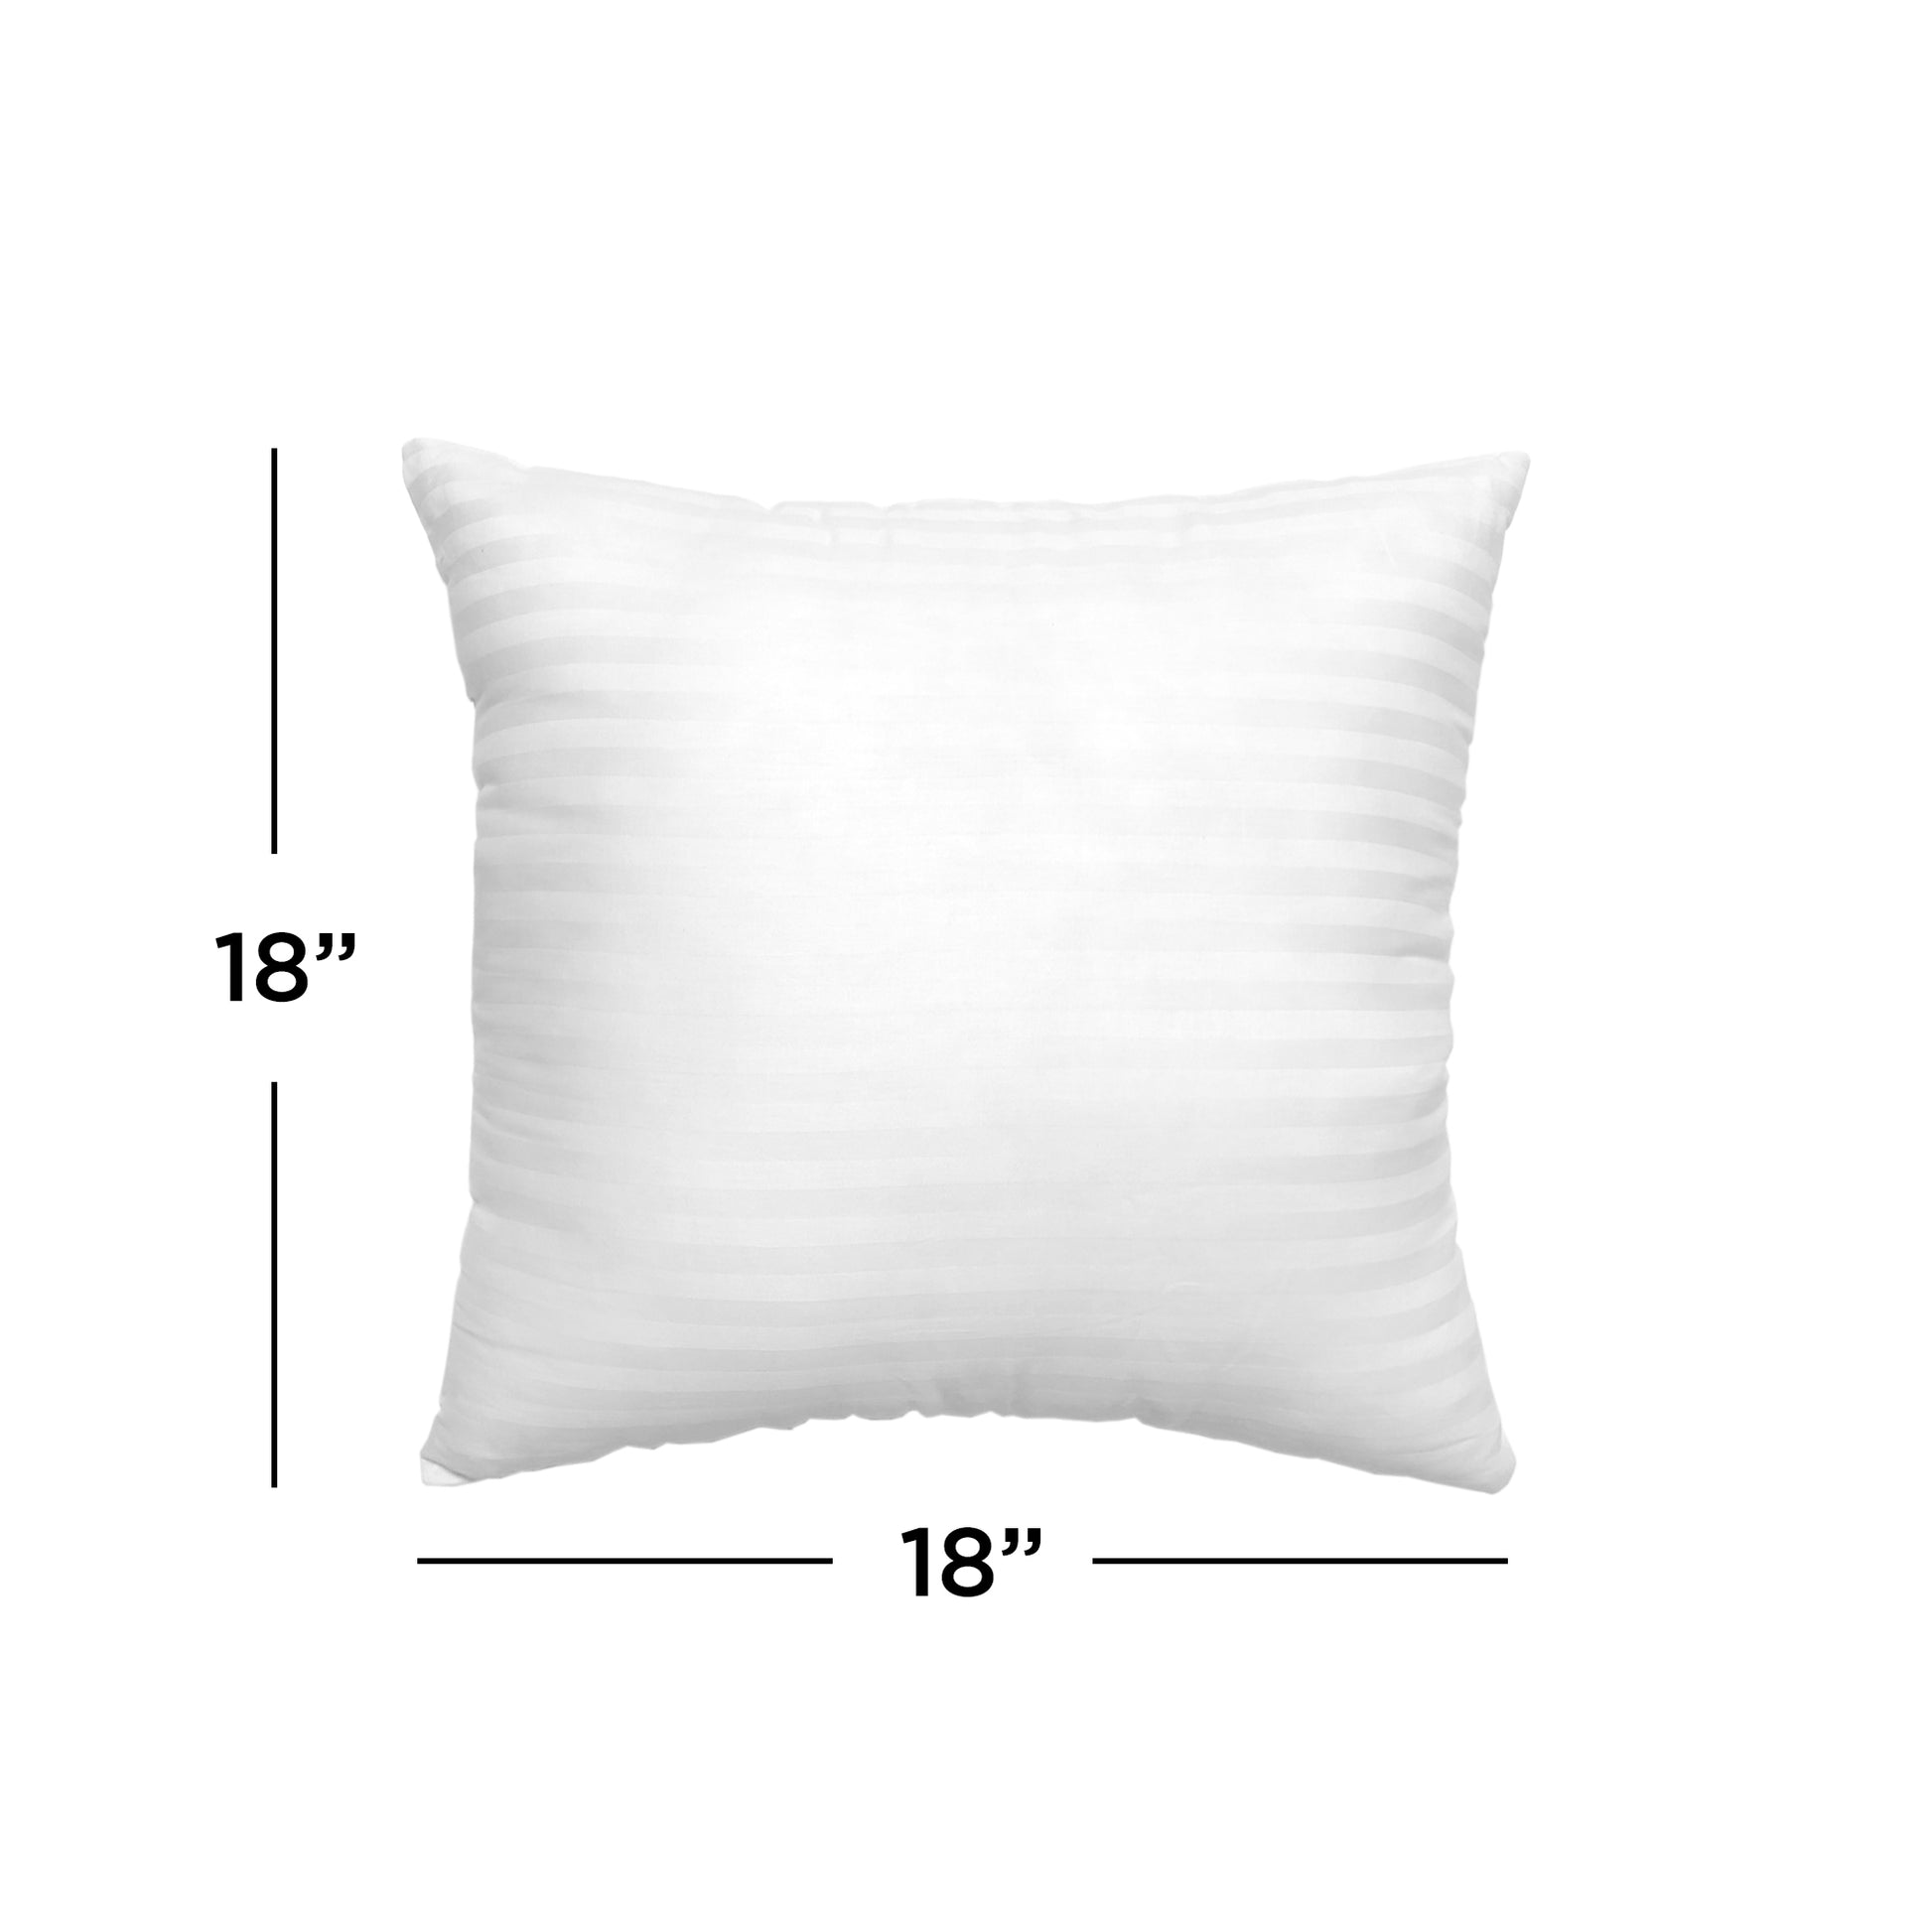 Hypoallergenic 18-inch & 26-inch Decor Pillow Inserts (Set of 4) - 18 x 18 inch